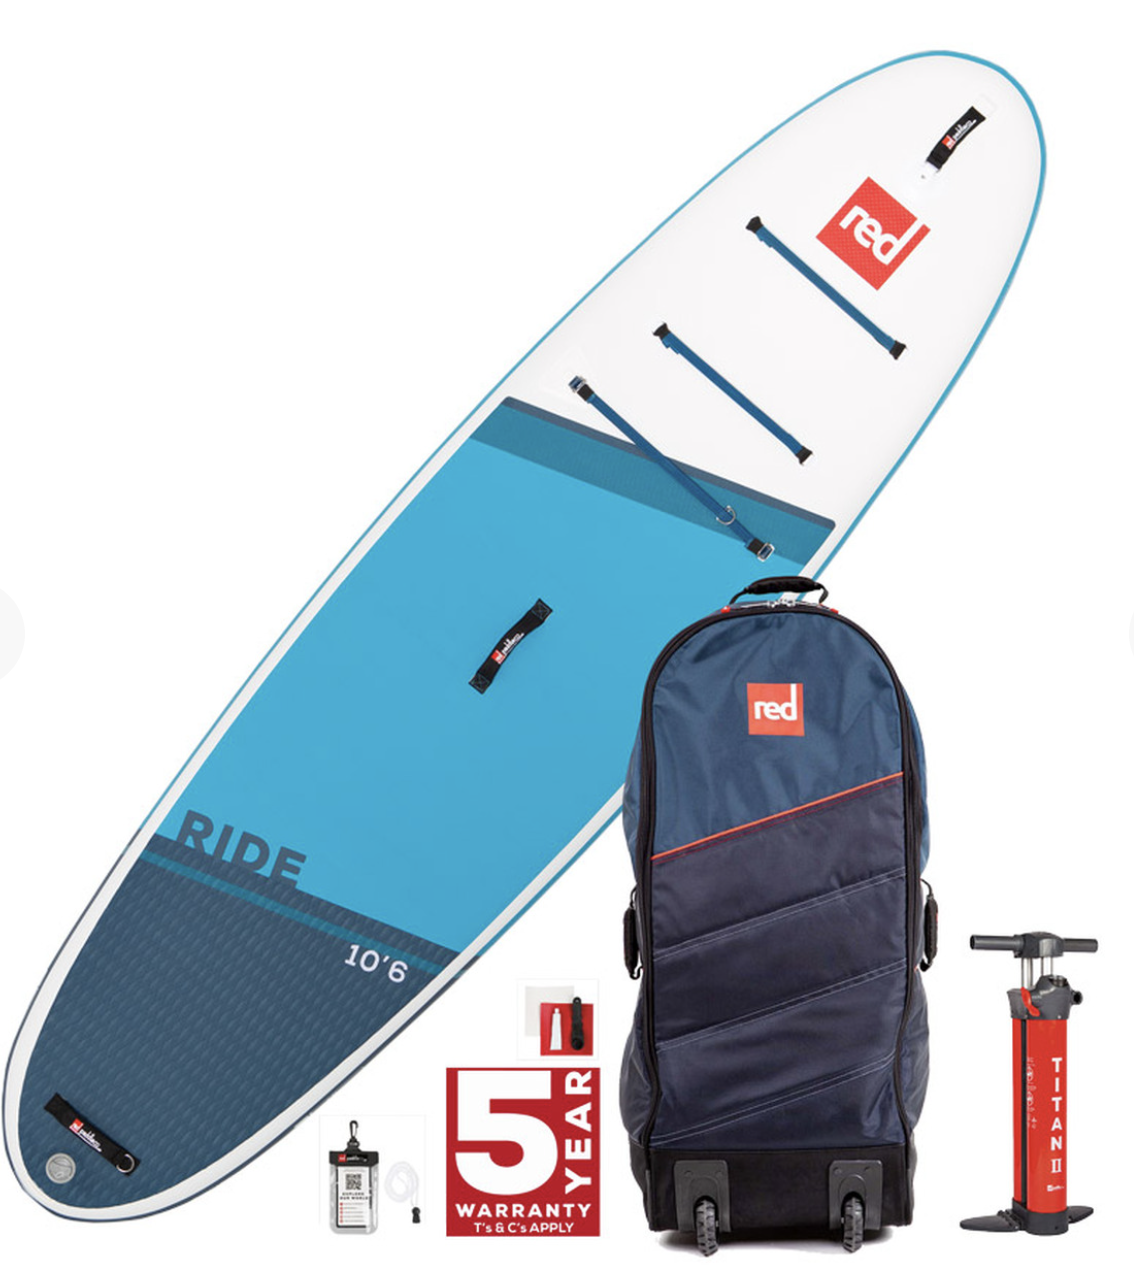 Red Paddle MSL 10'6"